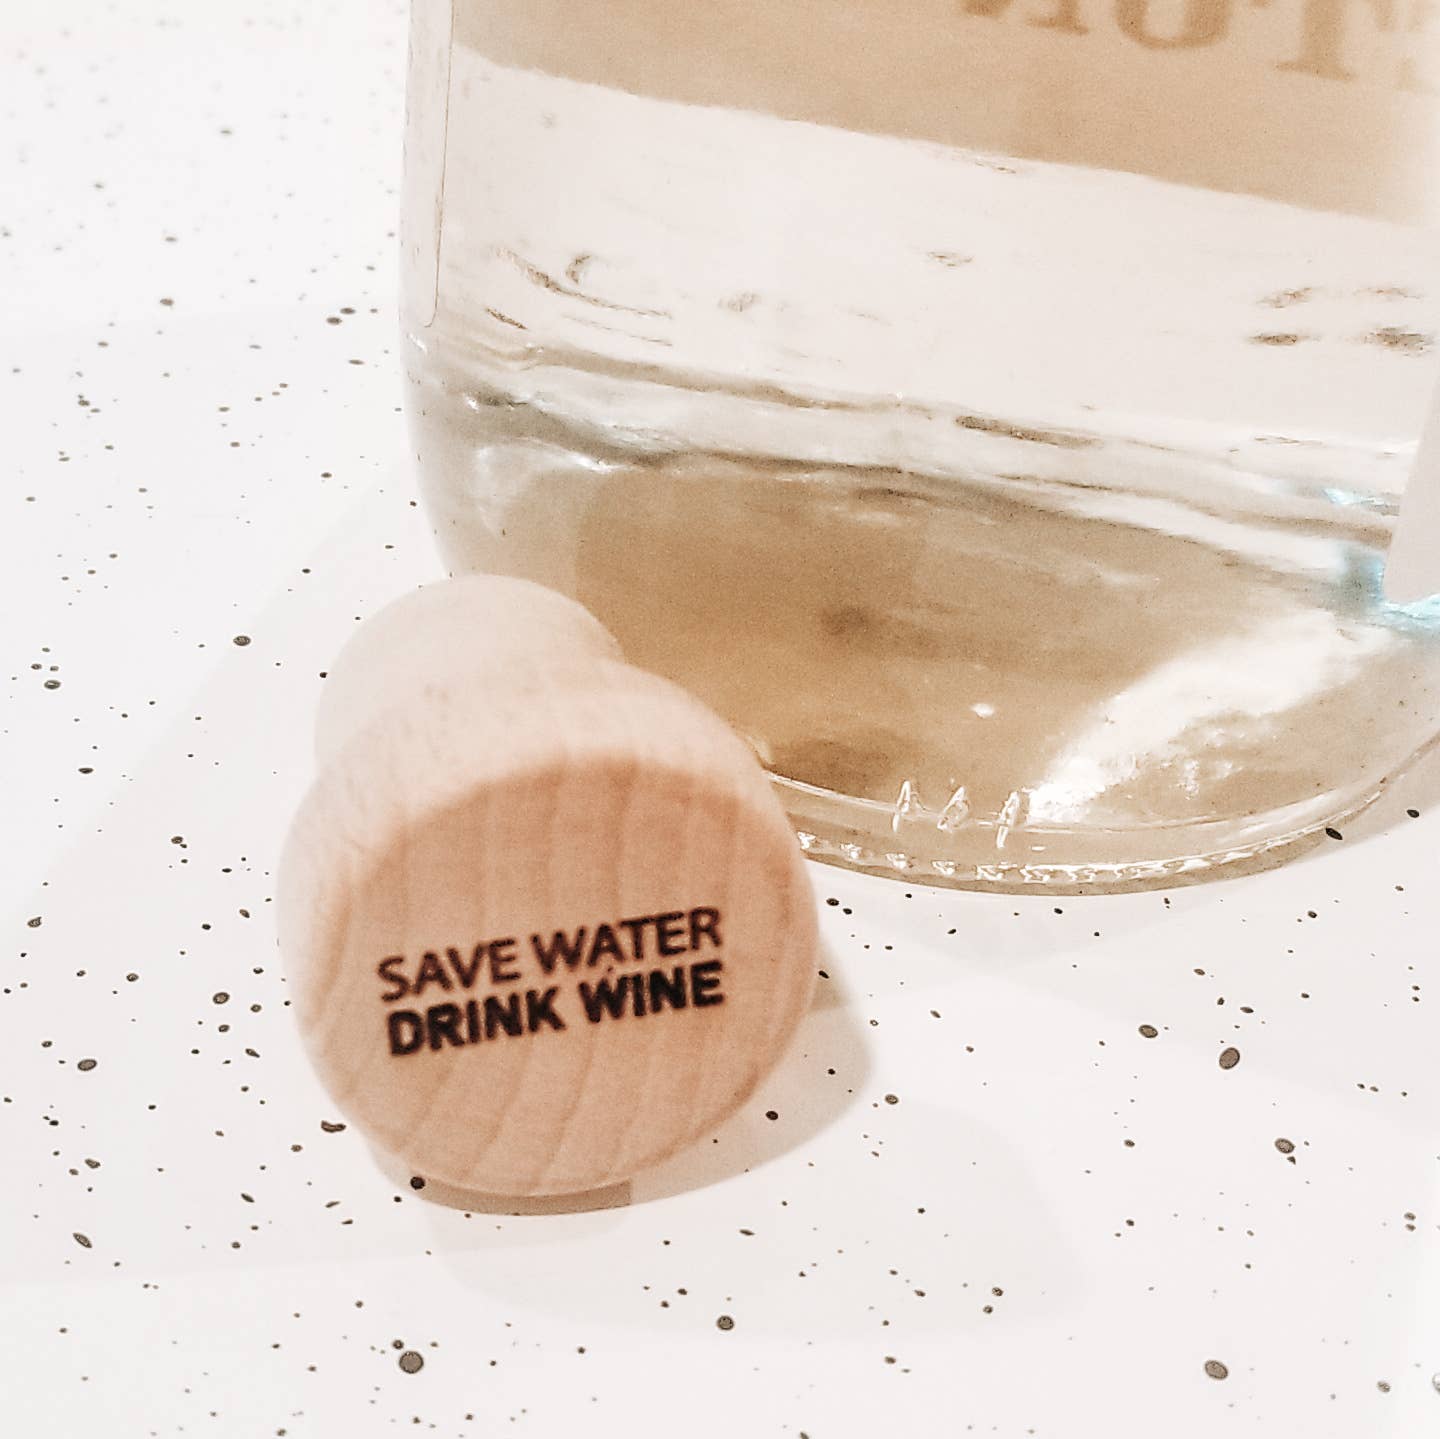 Save Water Wine Stopper